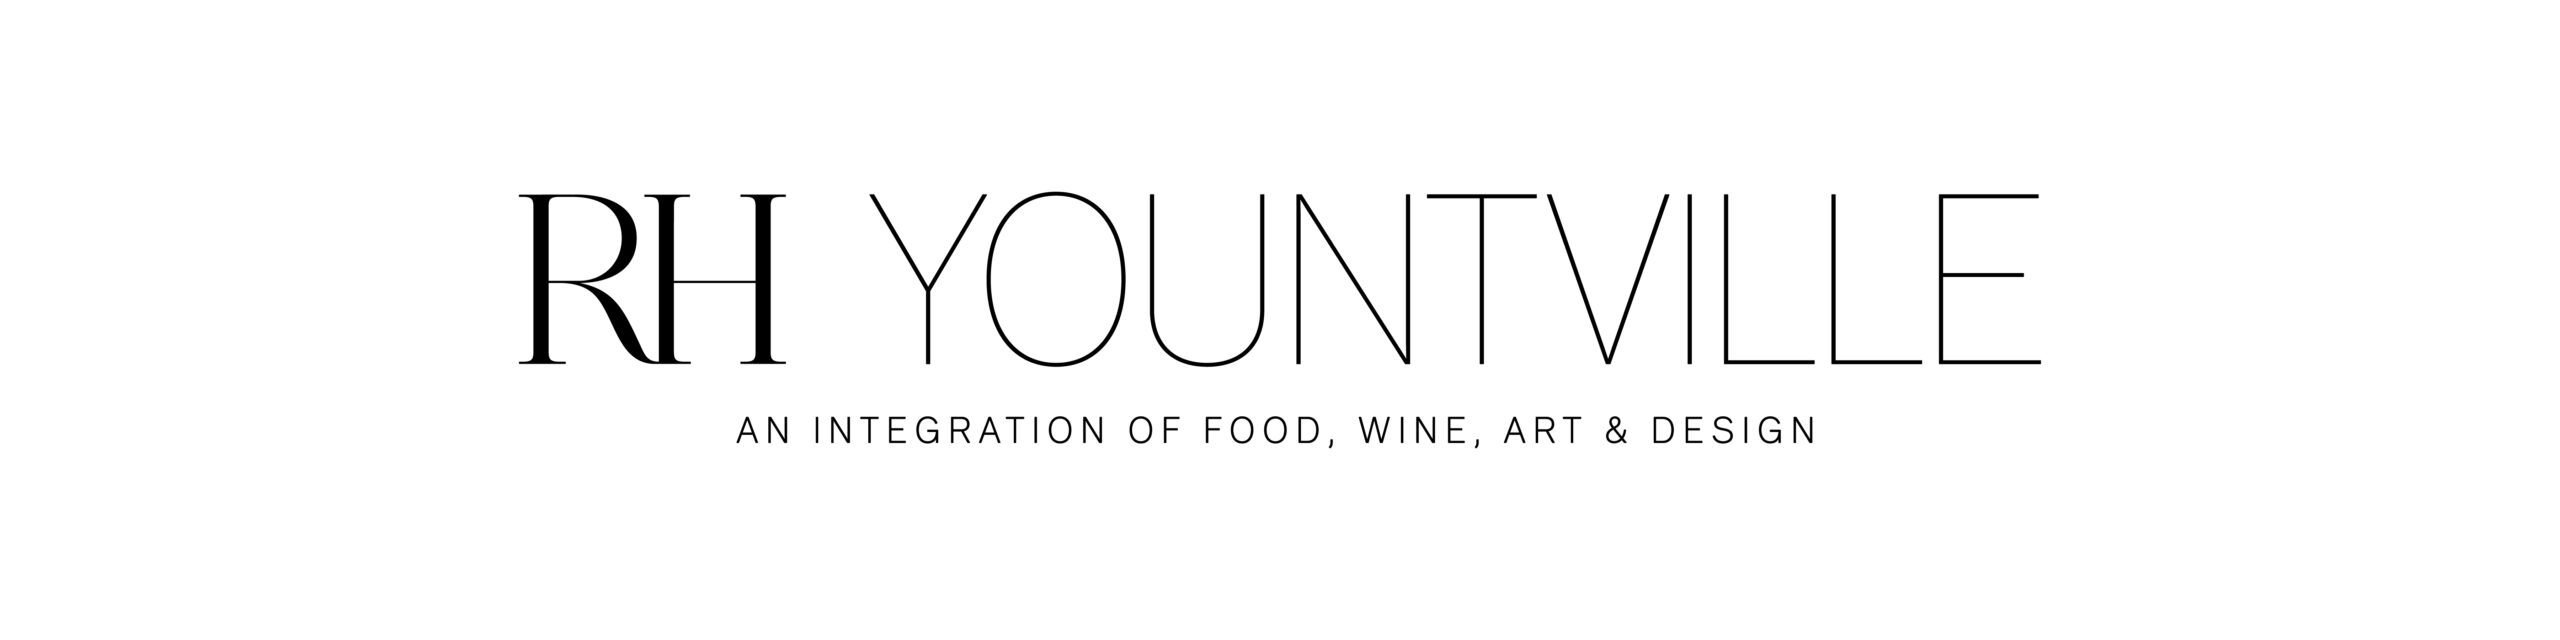 RH Yountville serves delicious food at the edge of town in Yountville California.